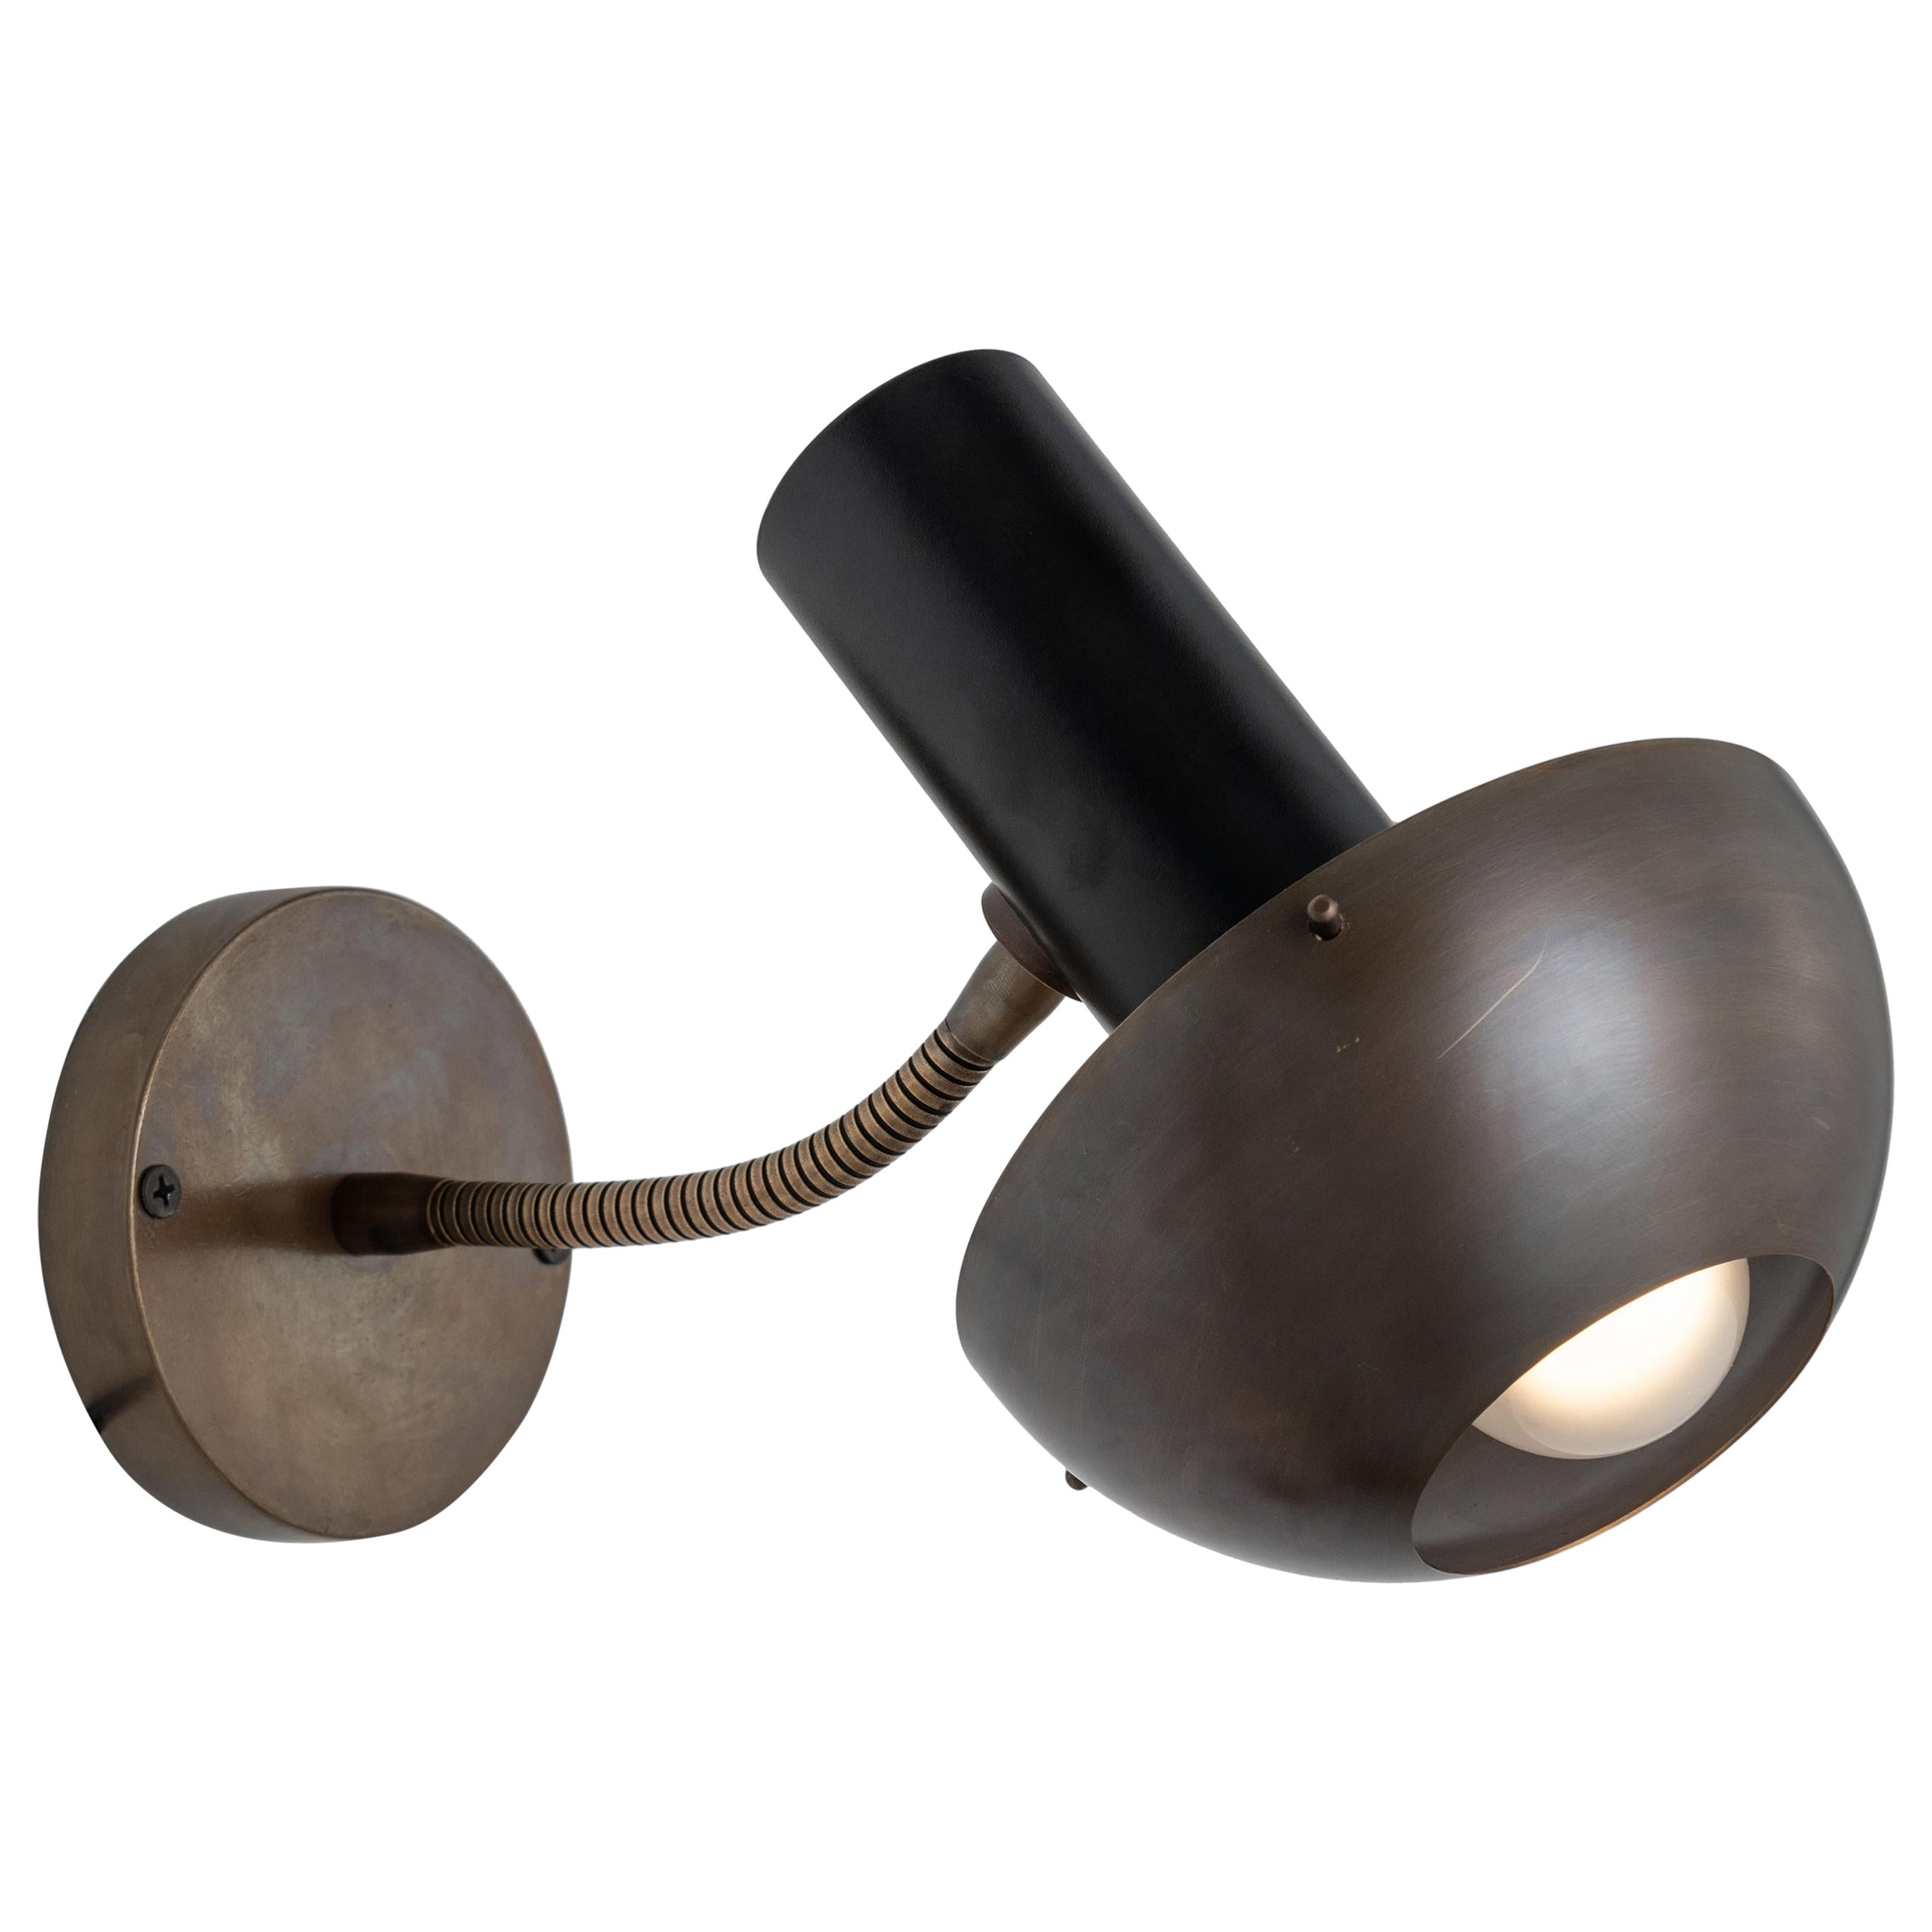 Brass and Black Metal Wall Sconce with Adjustable Arm, Made in Italy